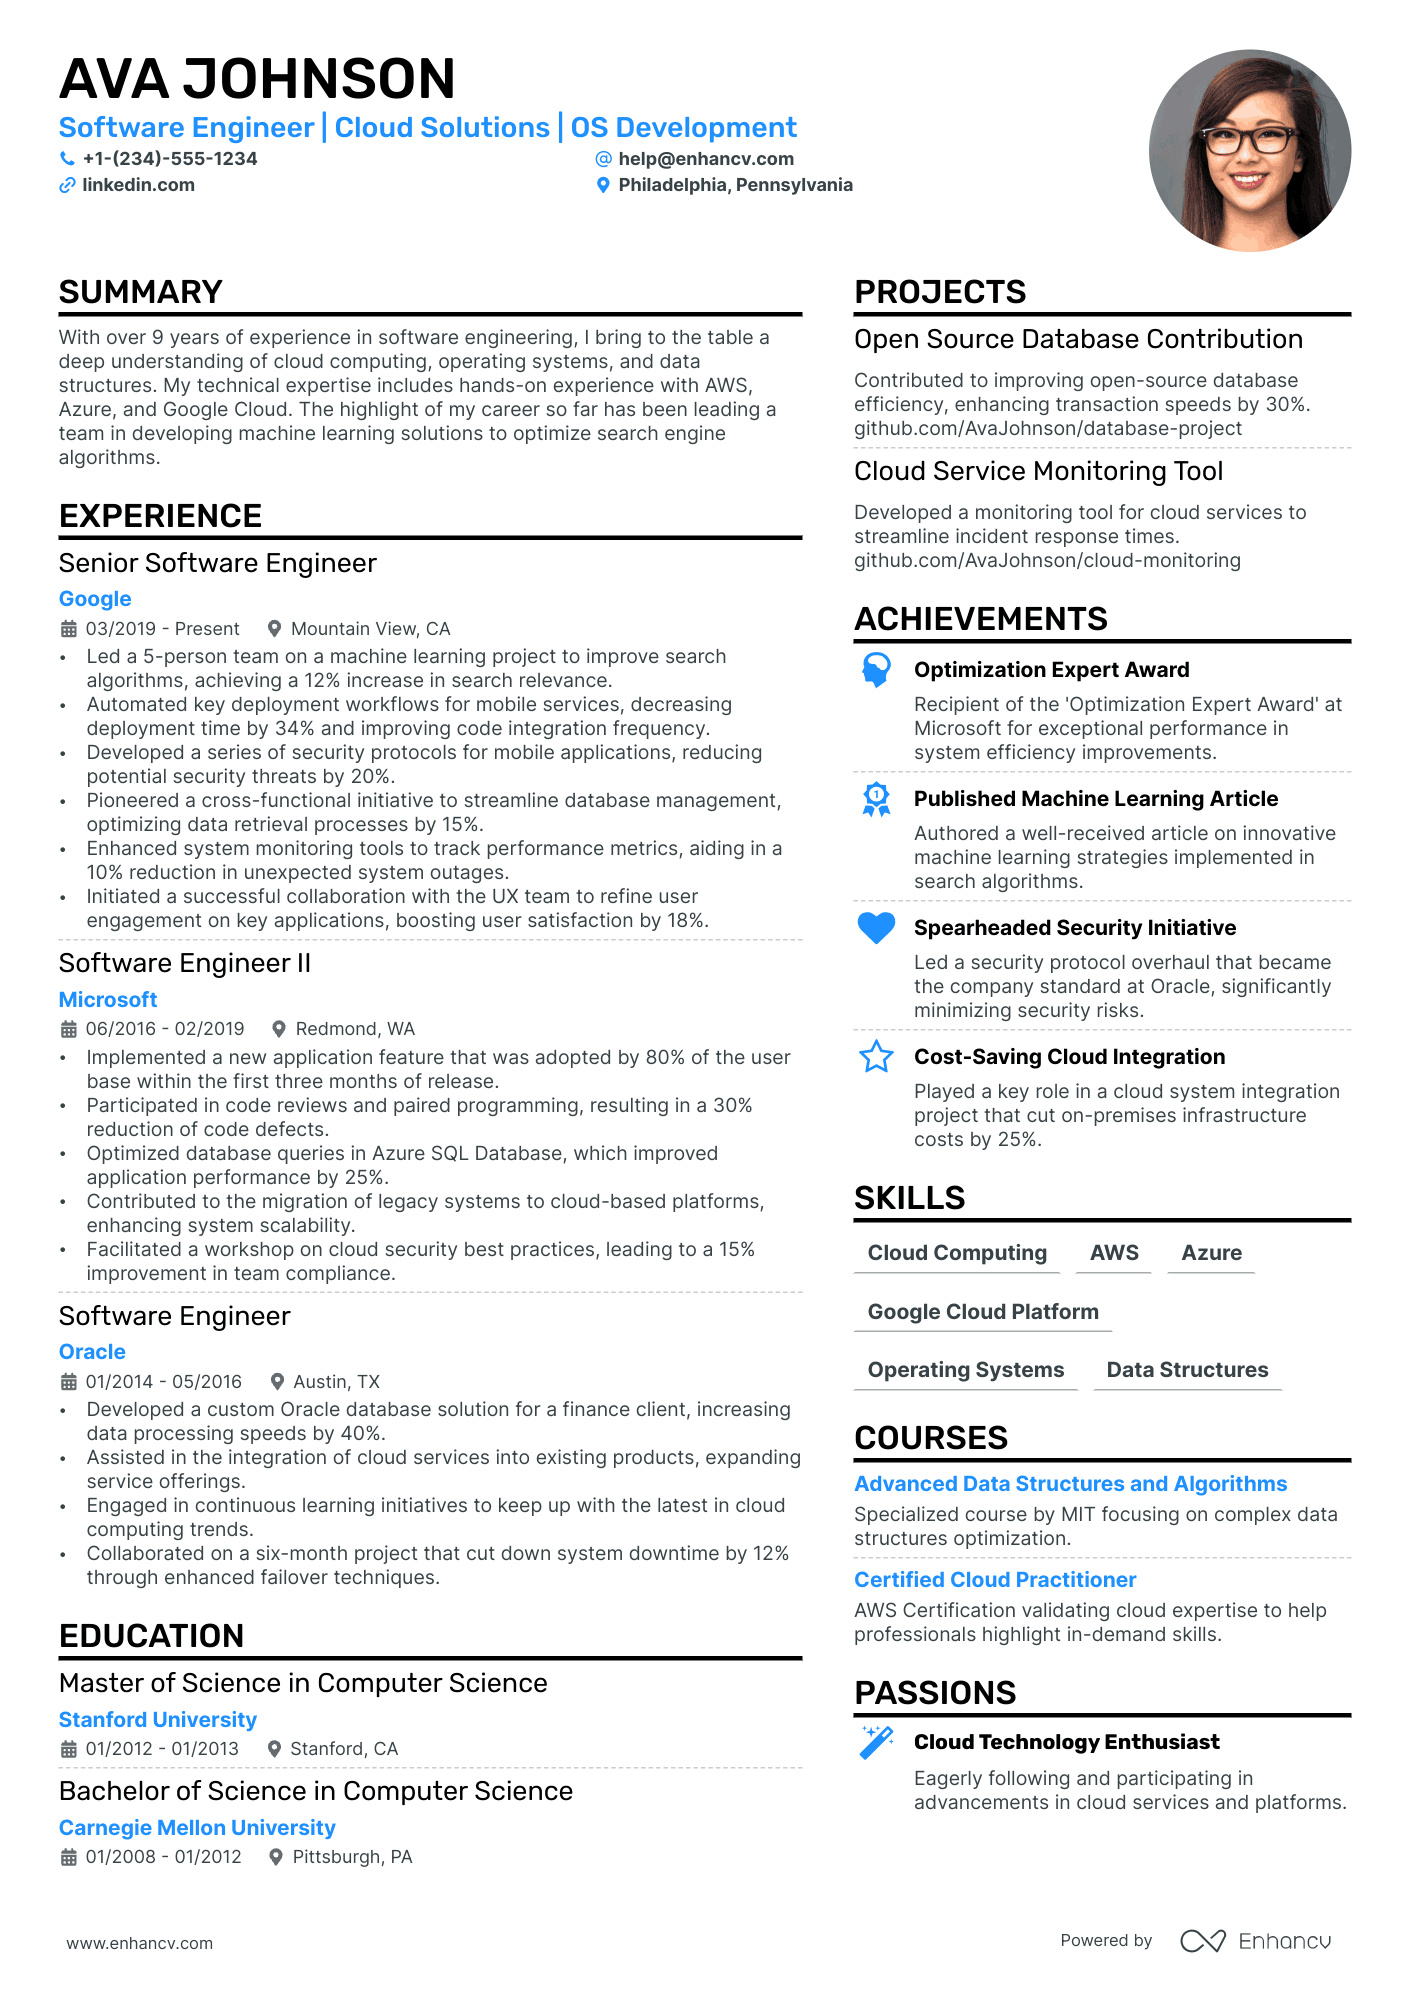 sample resume for software engineer with 4 years experience